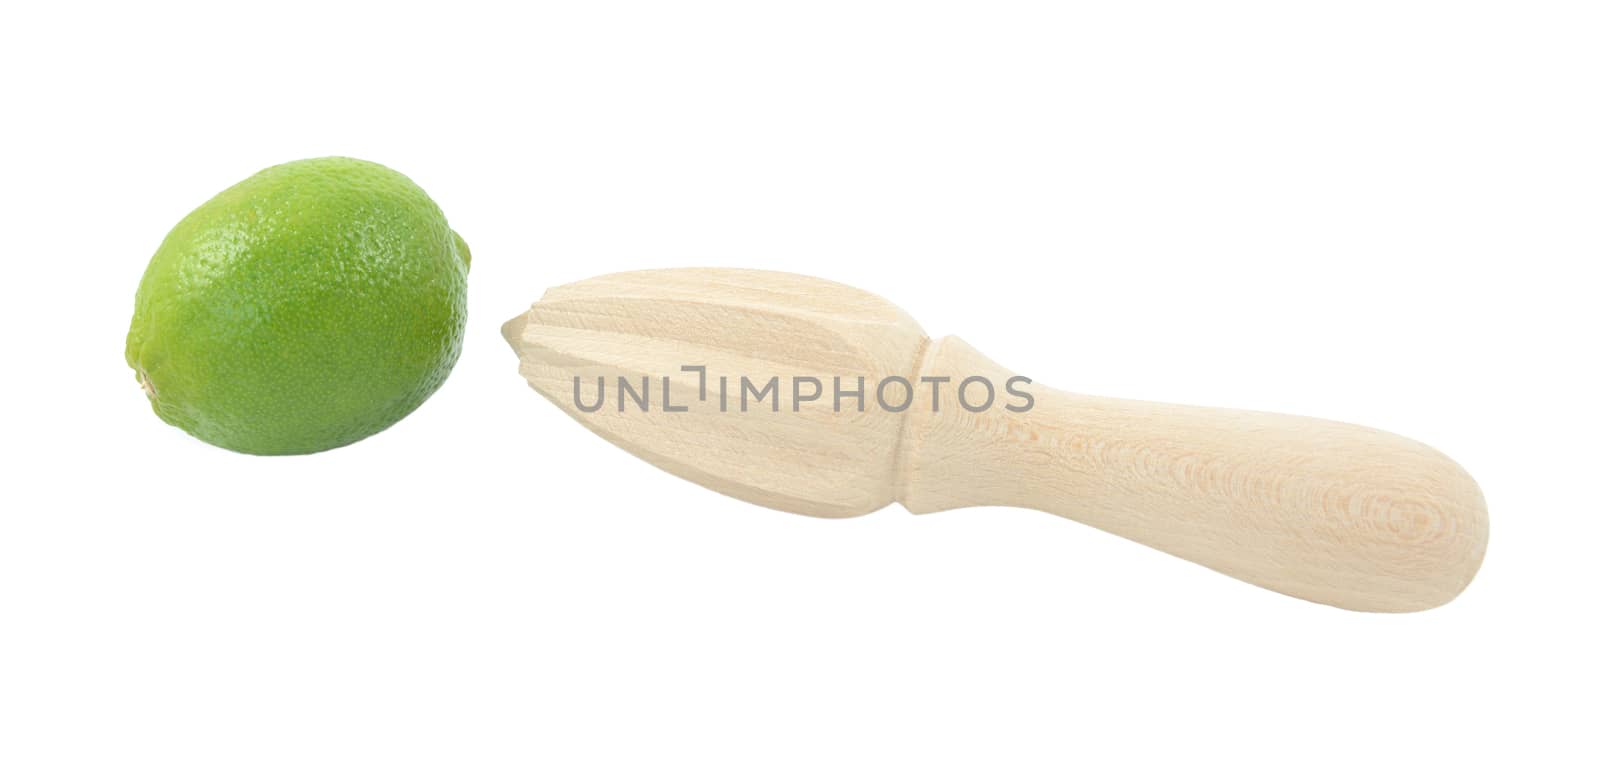 Whole lime and wooden citrus reamer, isolated on a white background